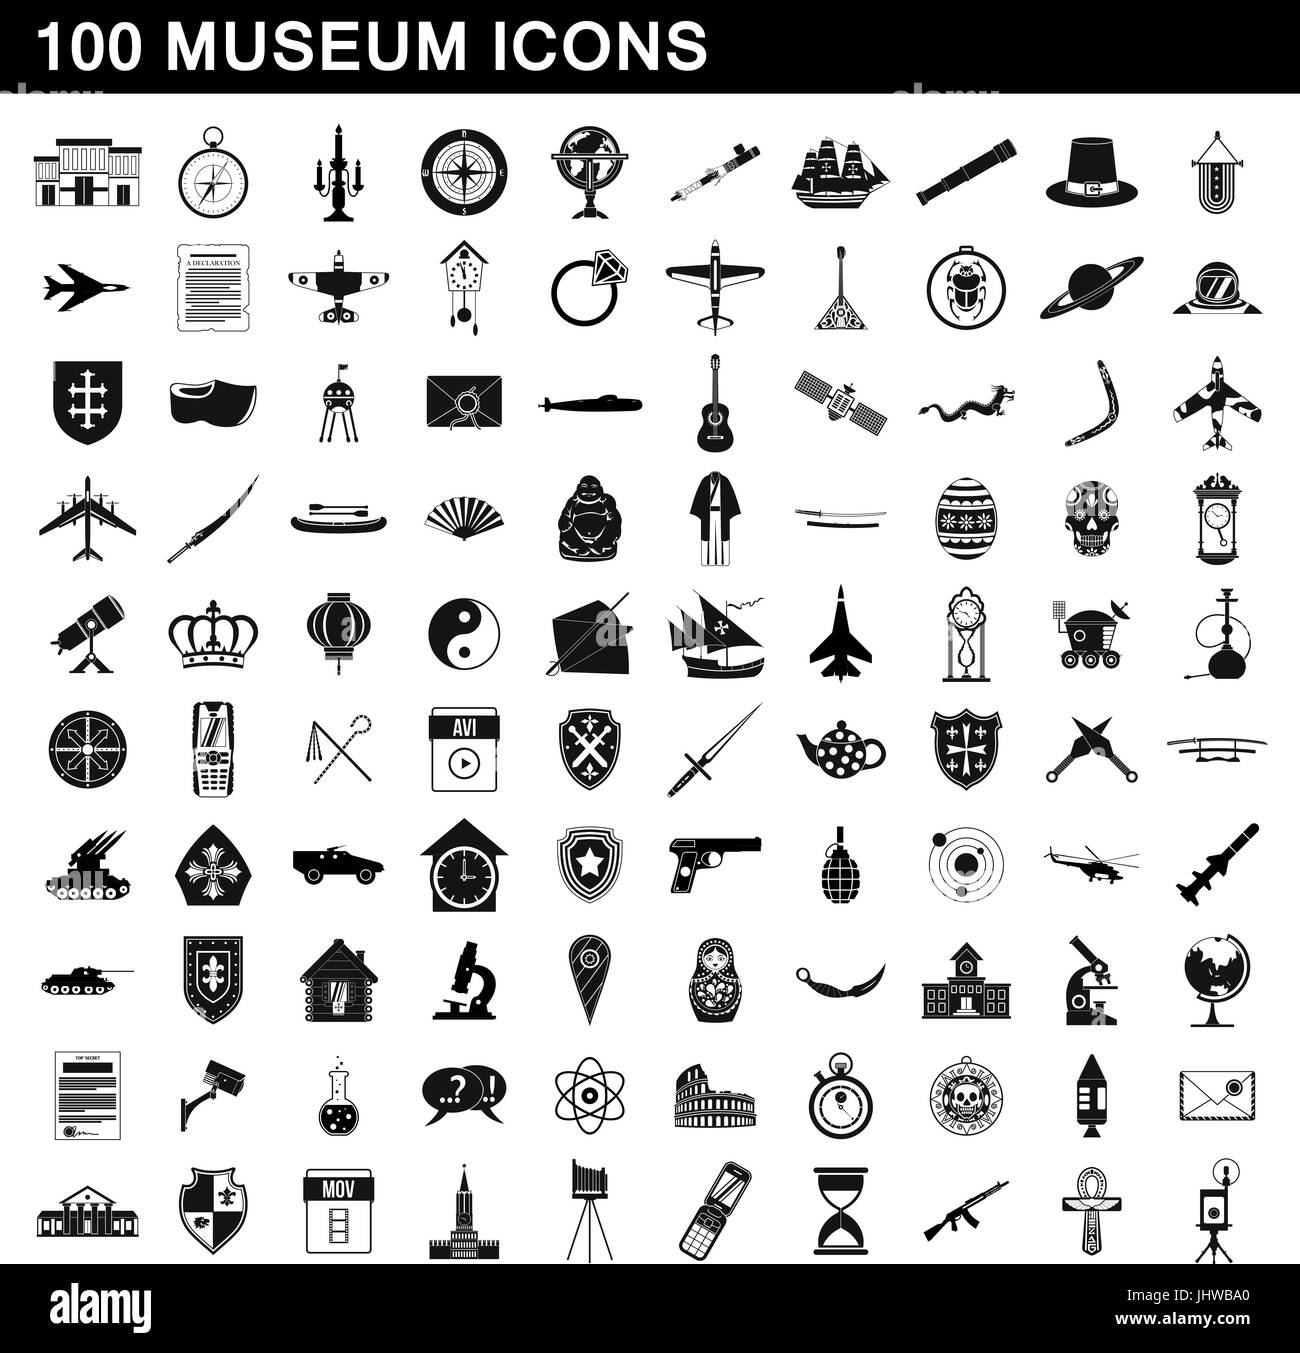 100 museum icons set, simple style Stock Vector